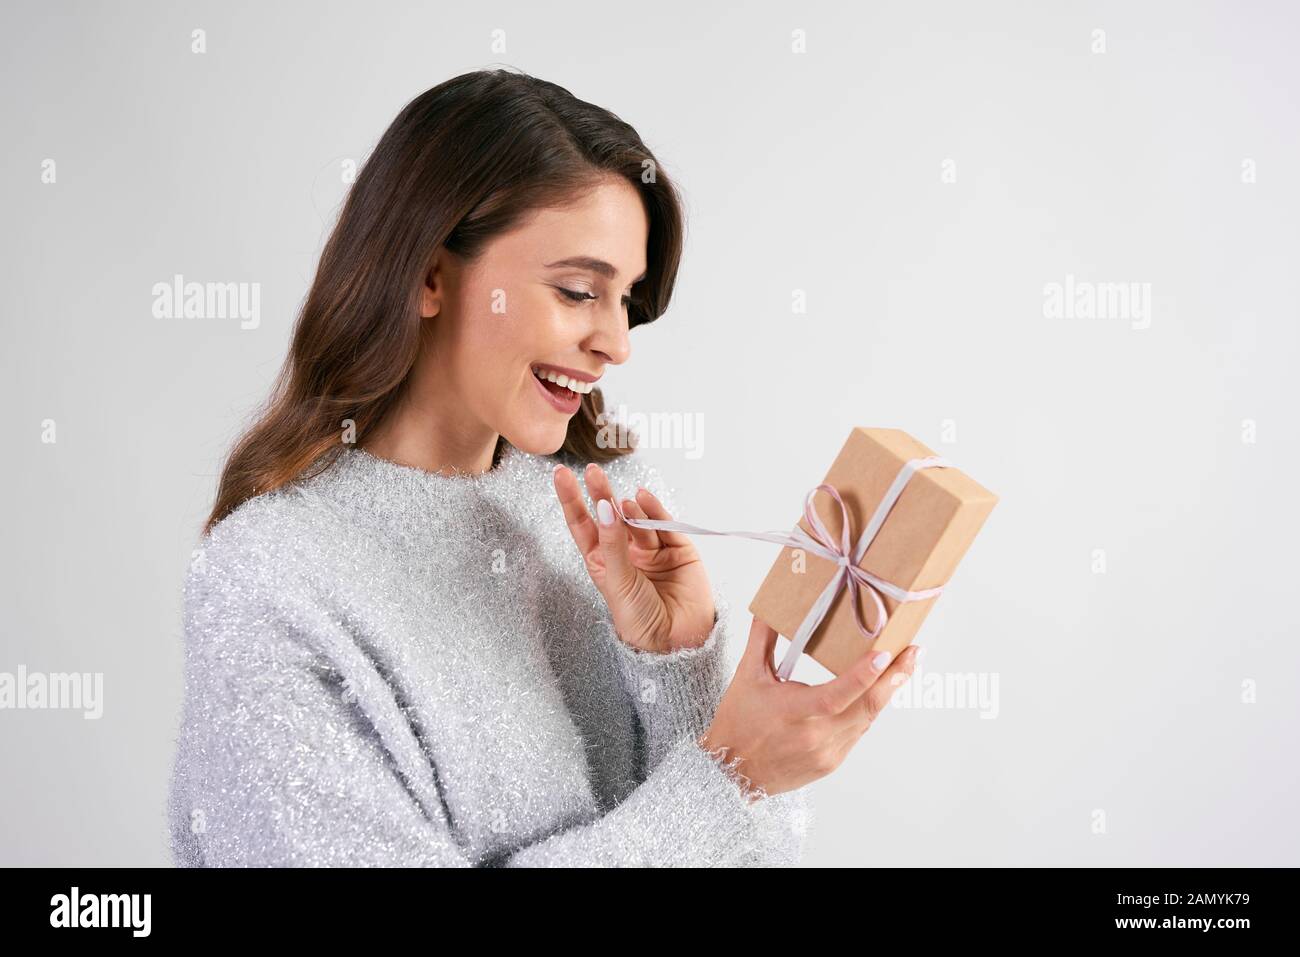 Happy woman opening the gift in studio shot Stock Photo